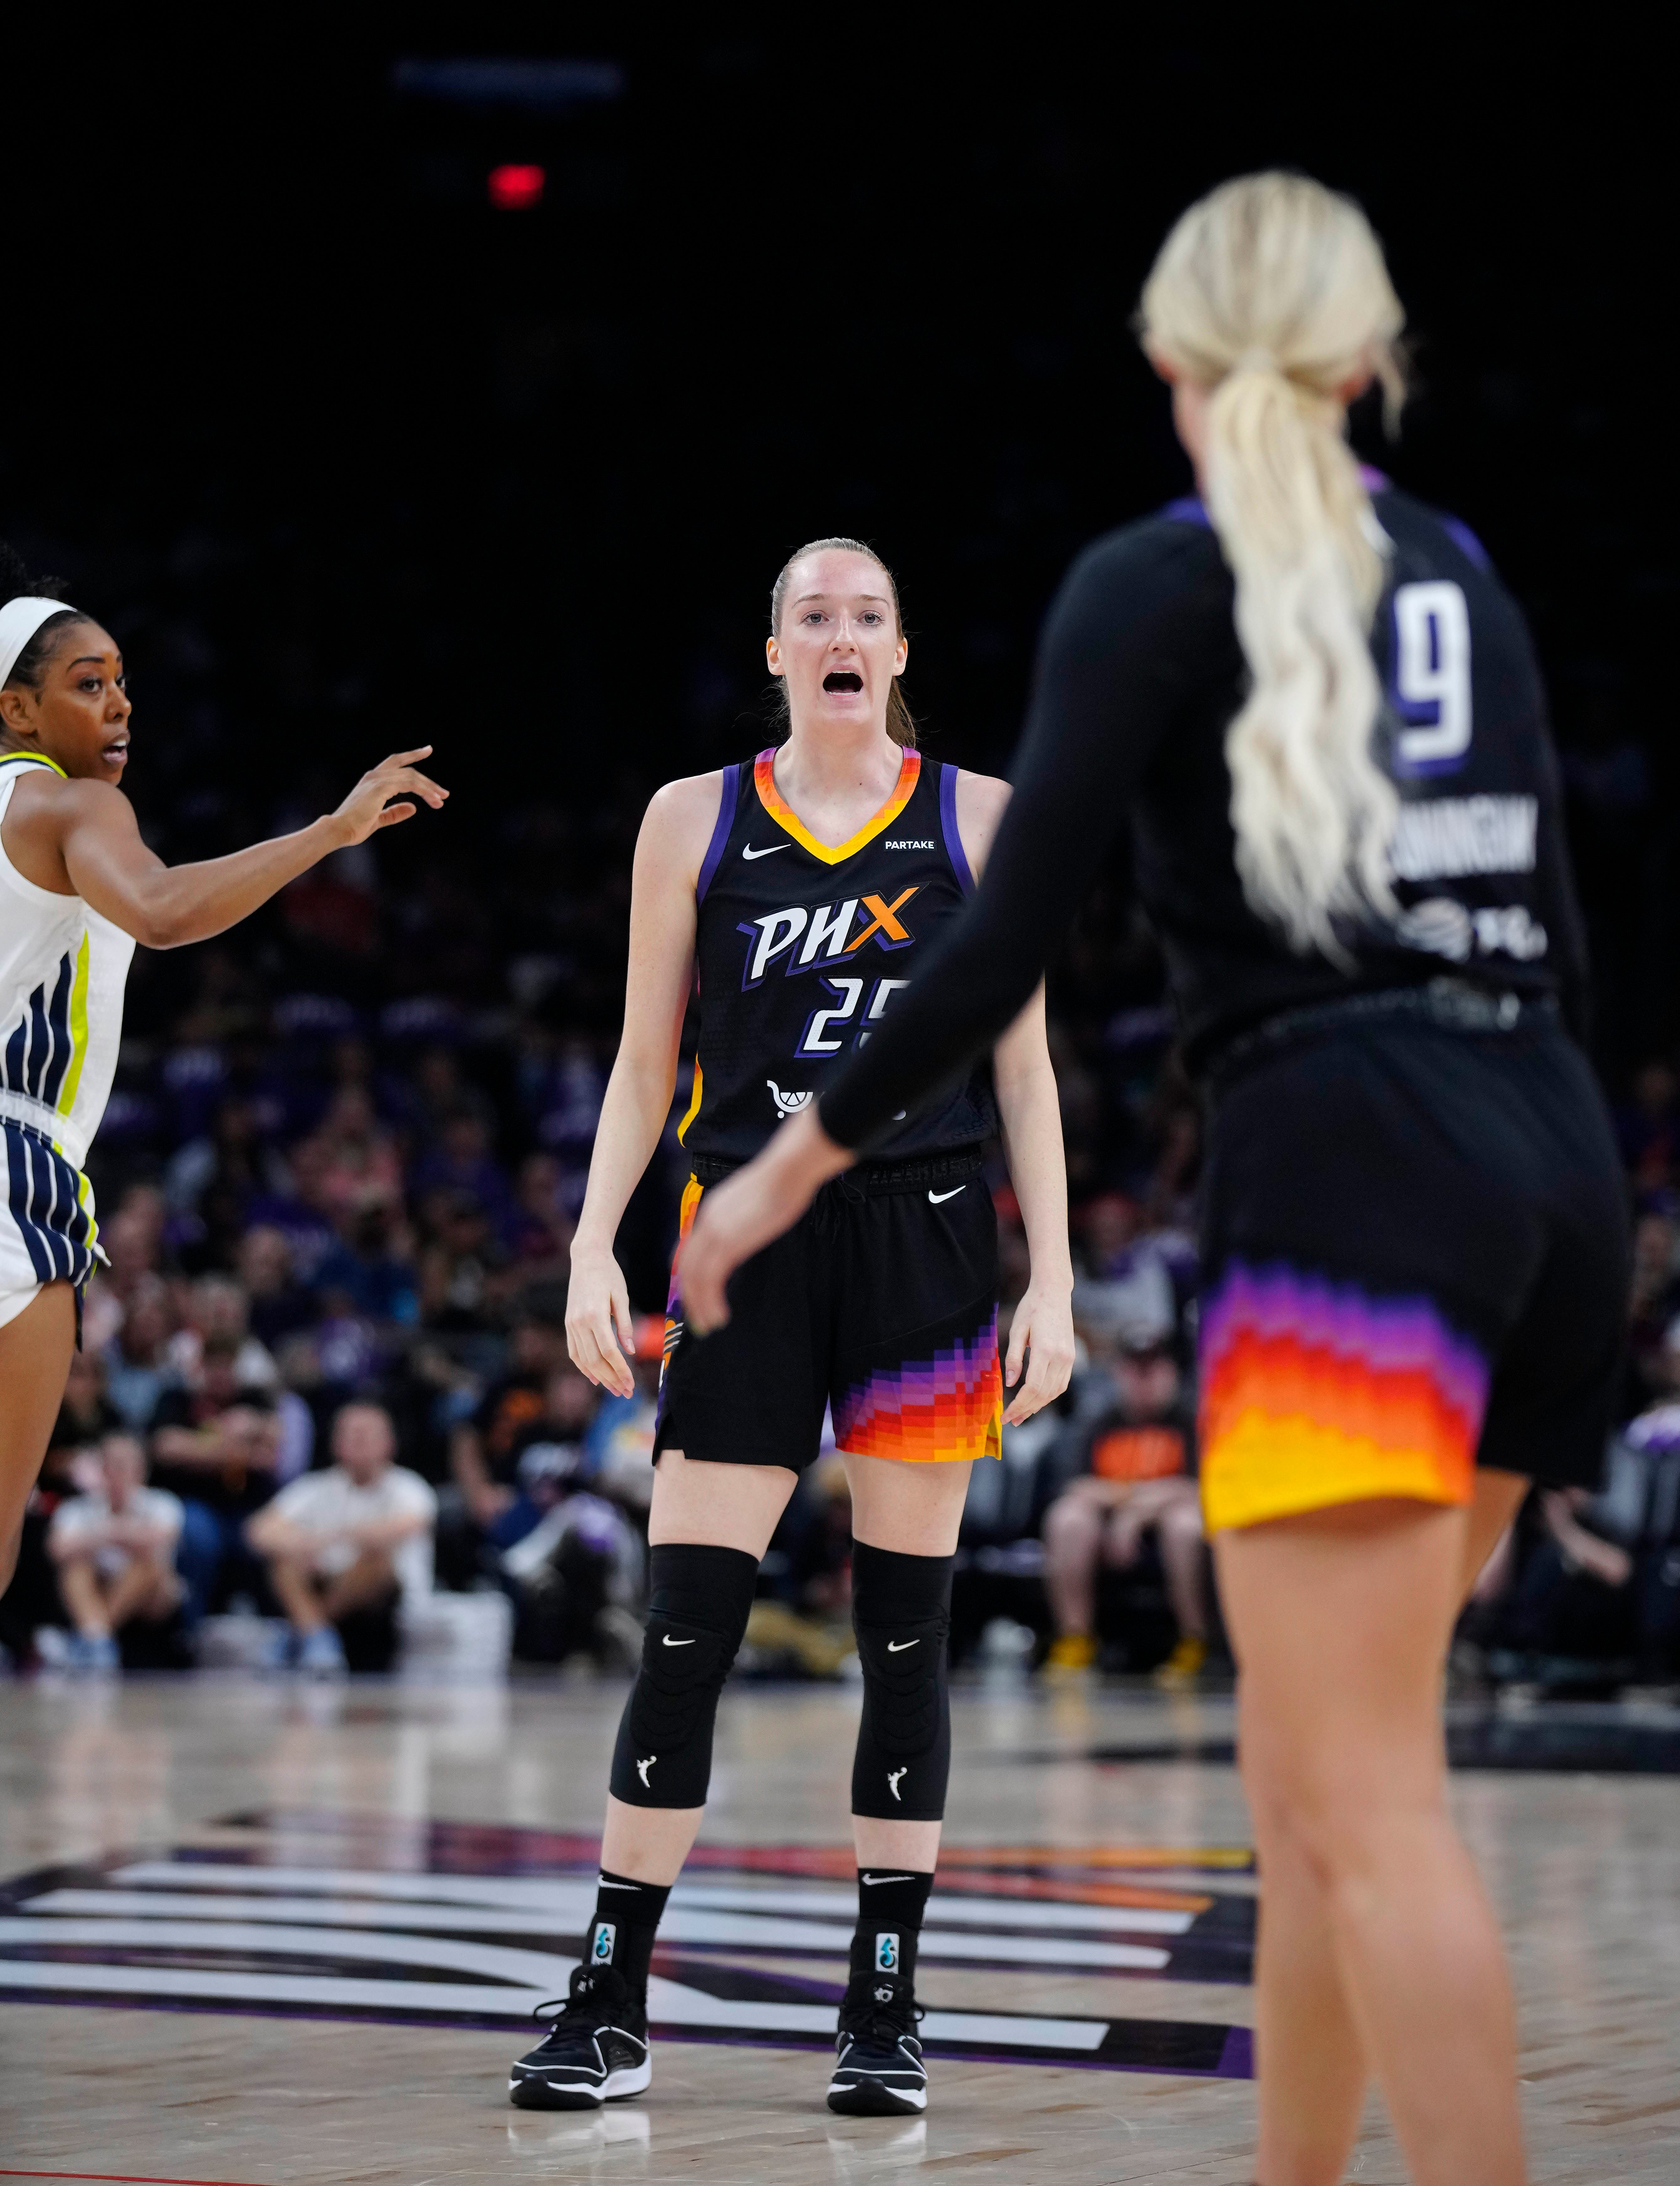 Mercury players praise new 'Unrivaled' women's basketball league coming in 2025